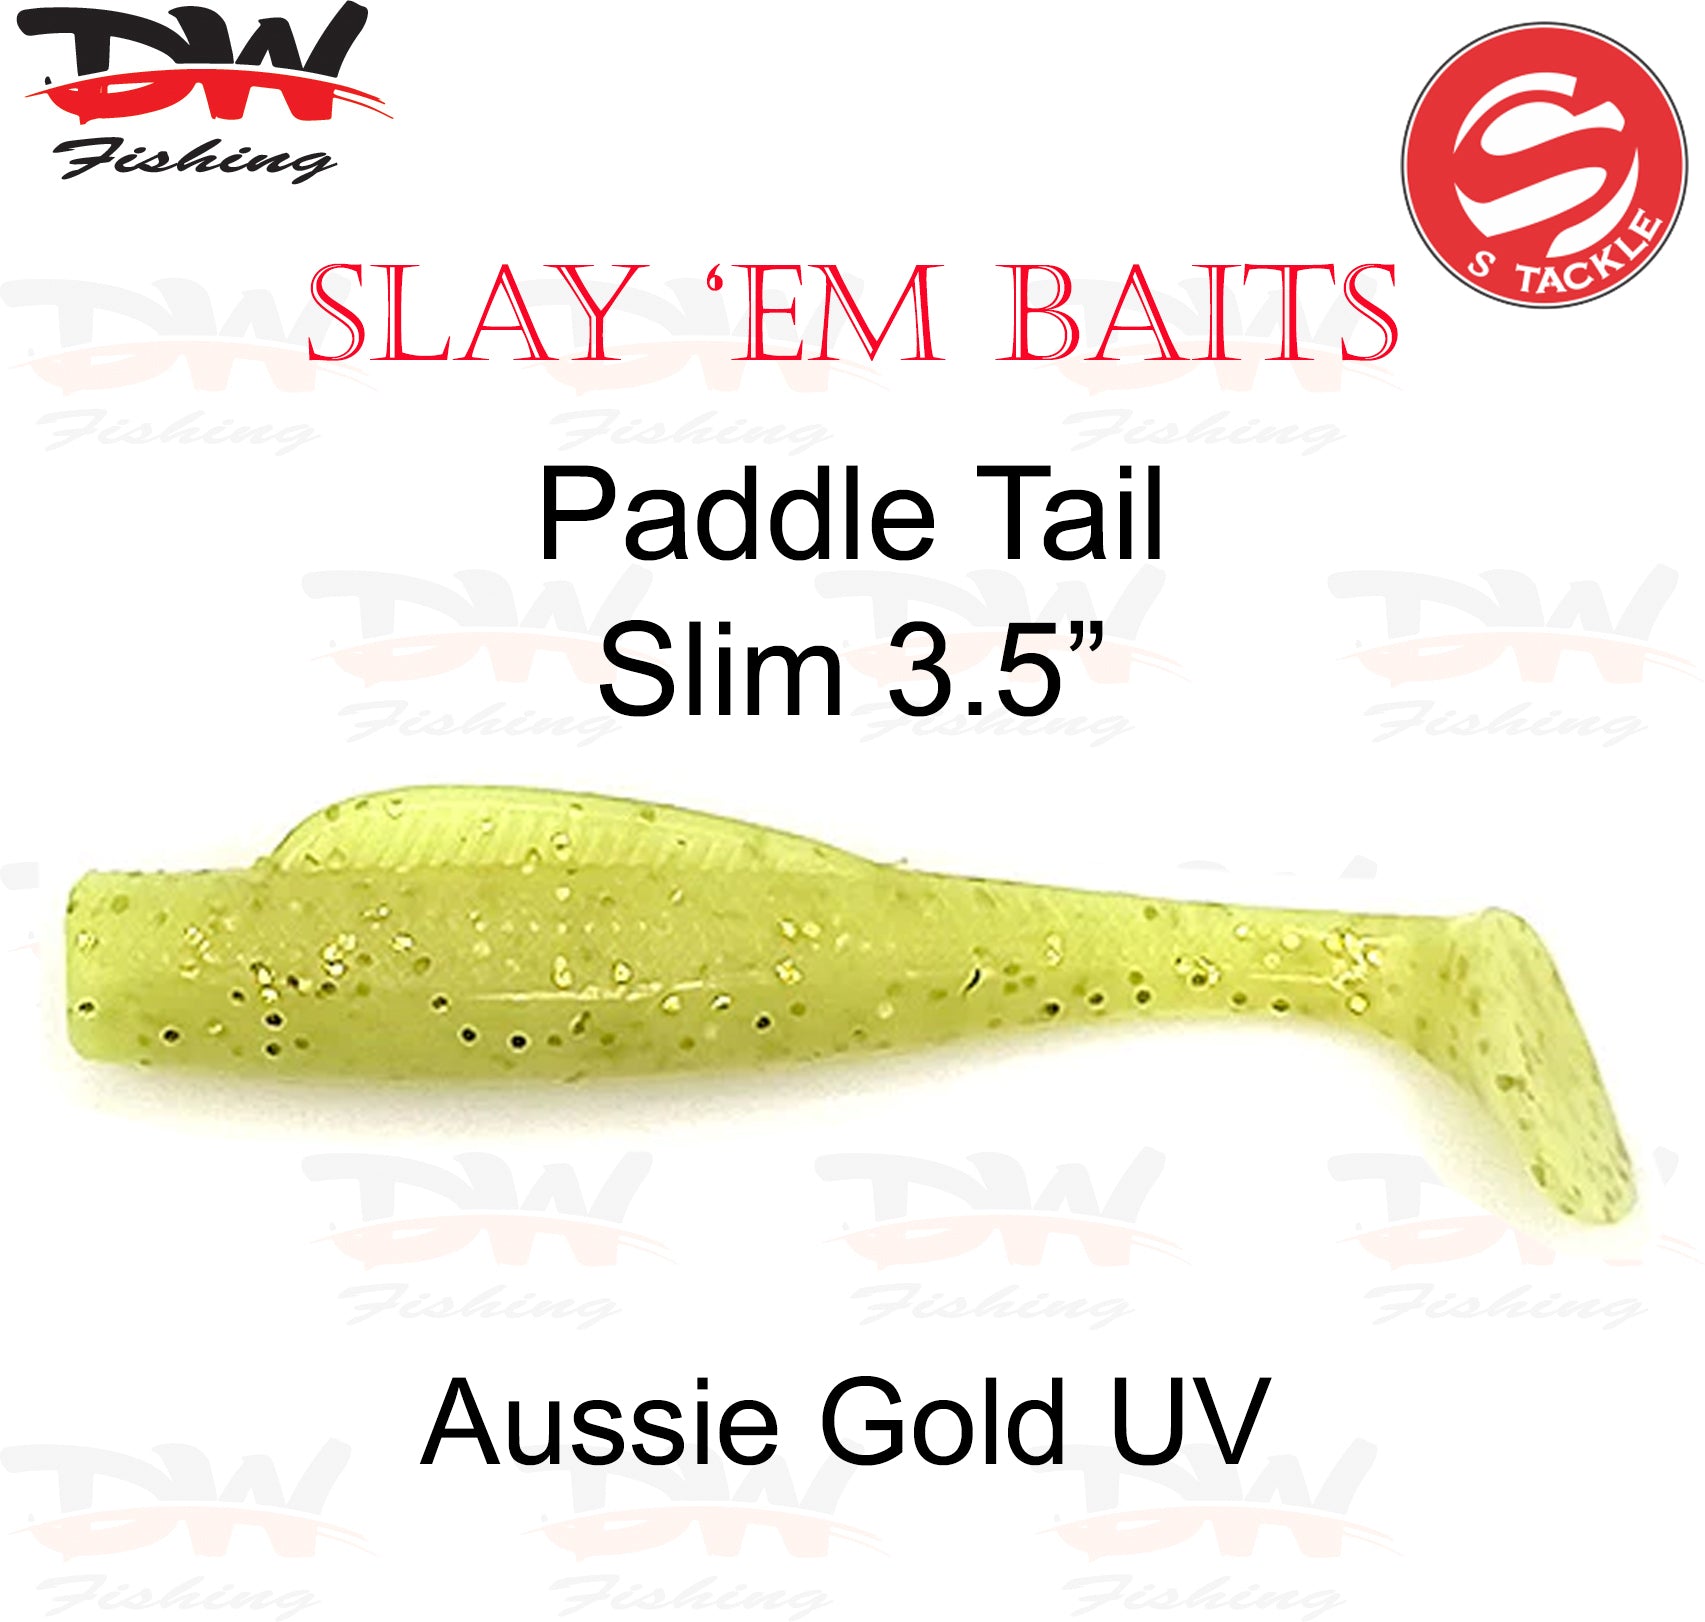 S Tackle 3.5 inch paddle tail slim soft plastic lure Colour Aussie Gold UV